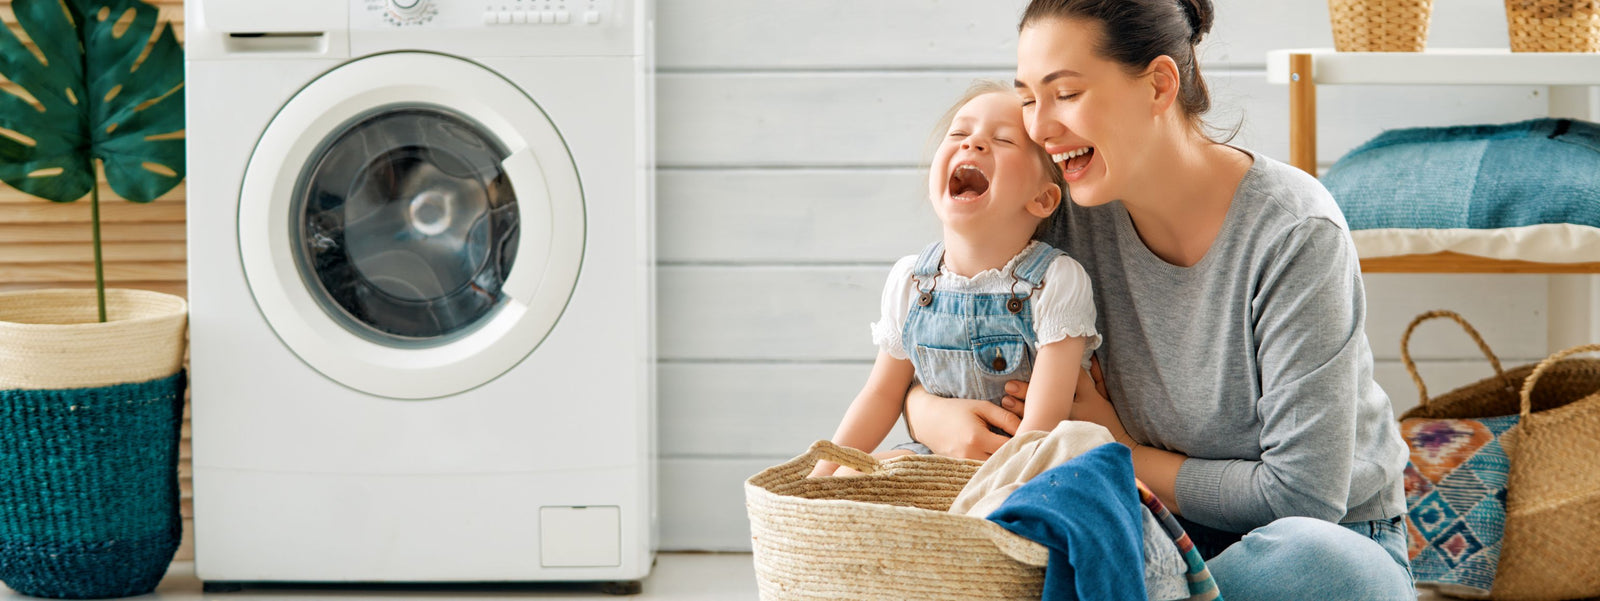 The Benefits of Using Eco-Friendly and Sustainable Laundry Detergents